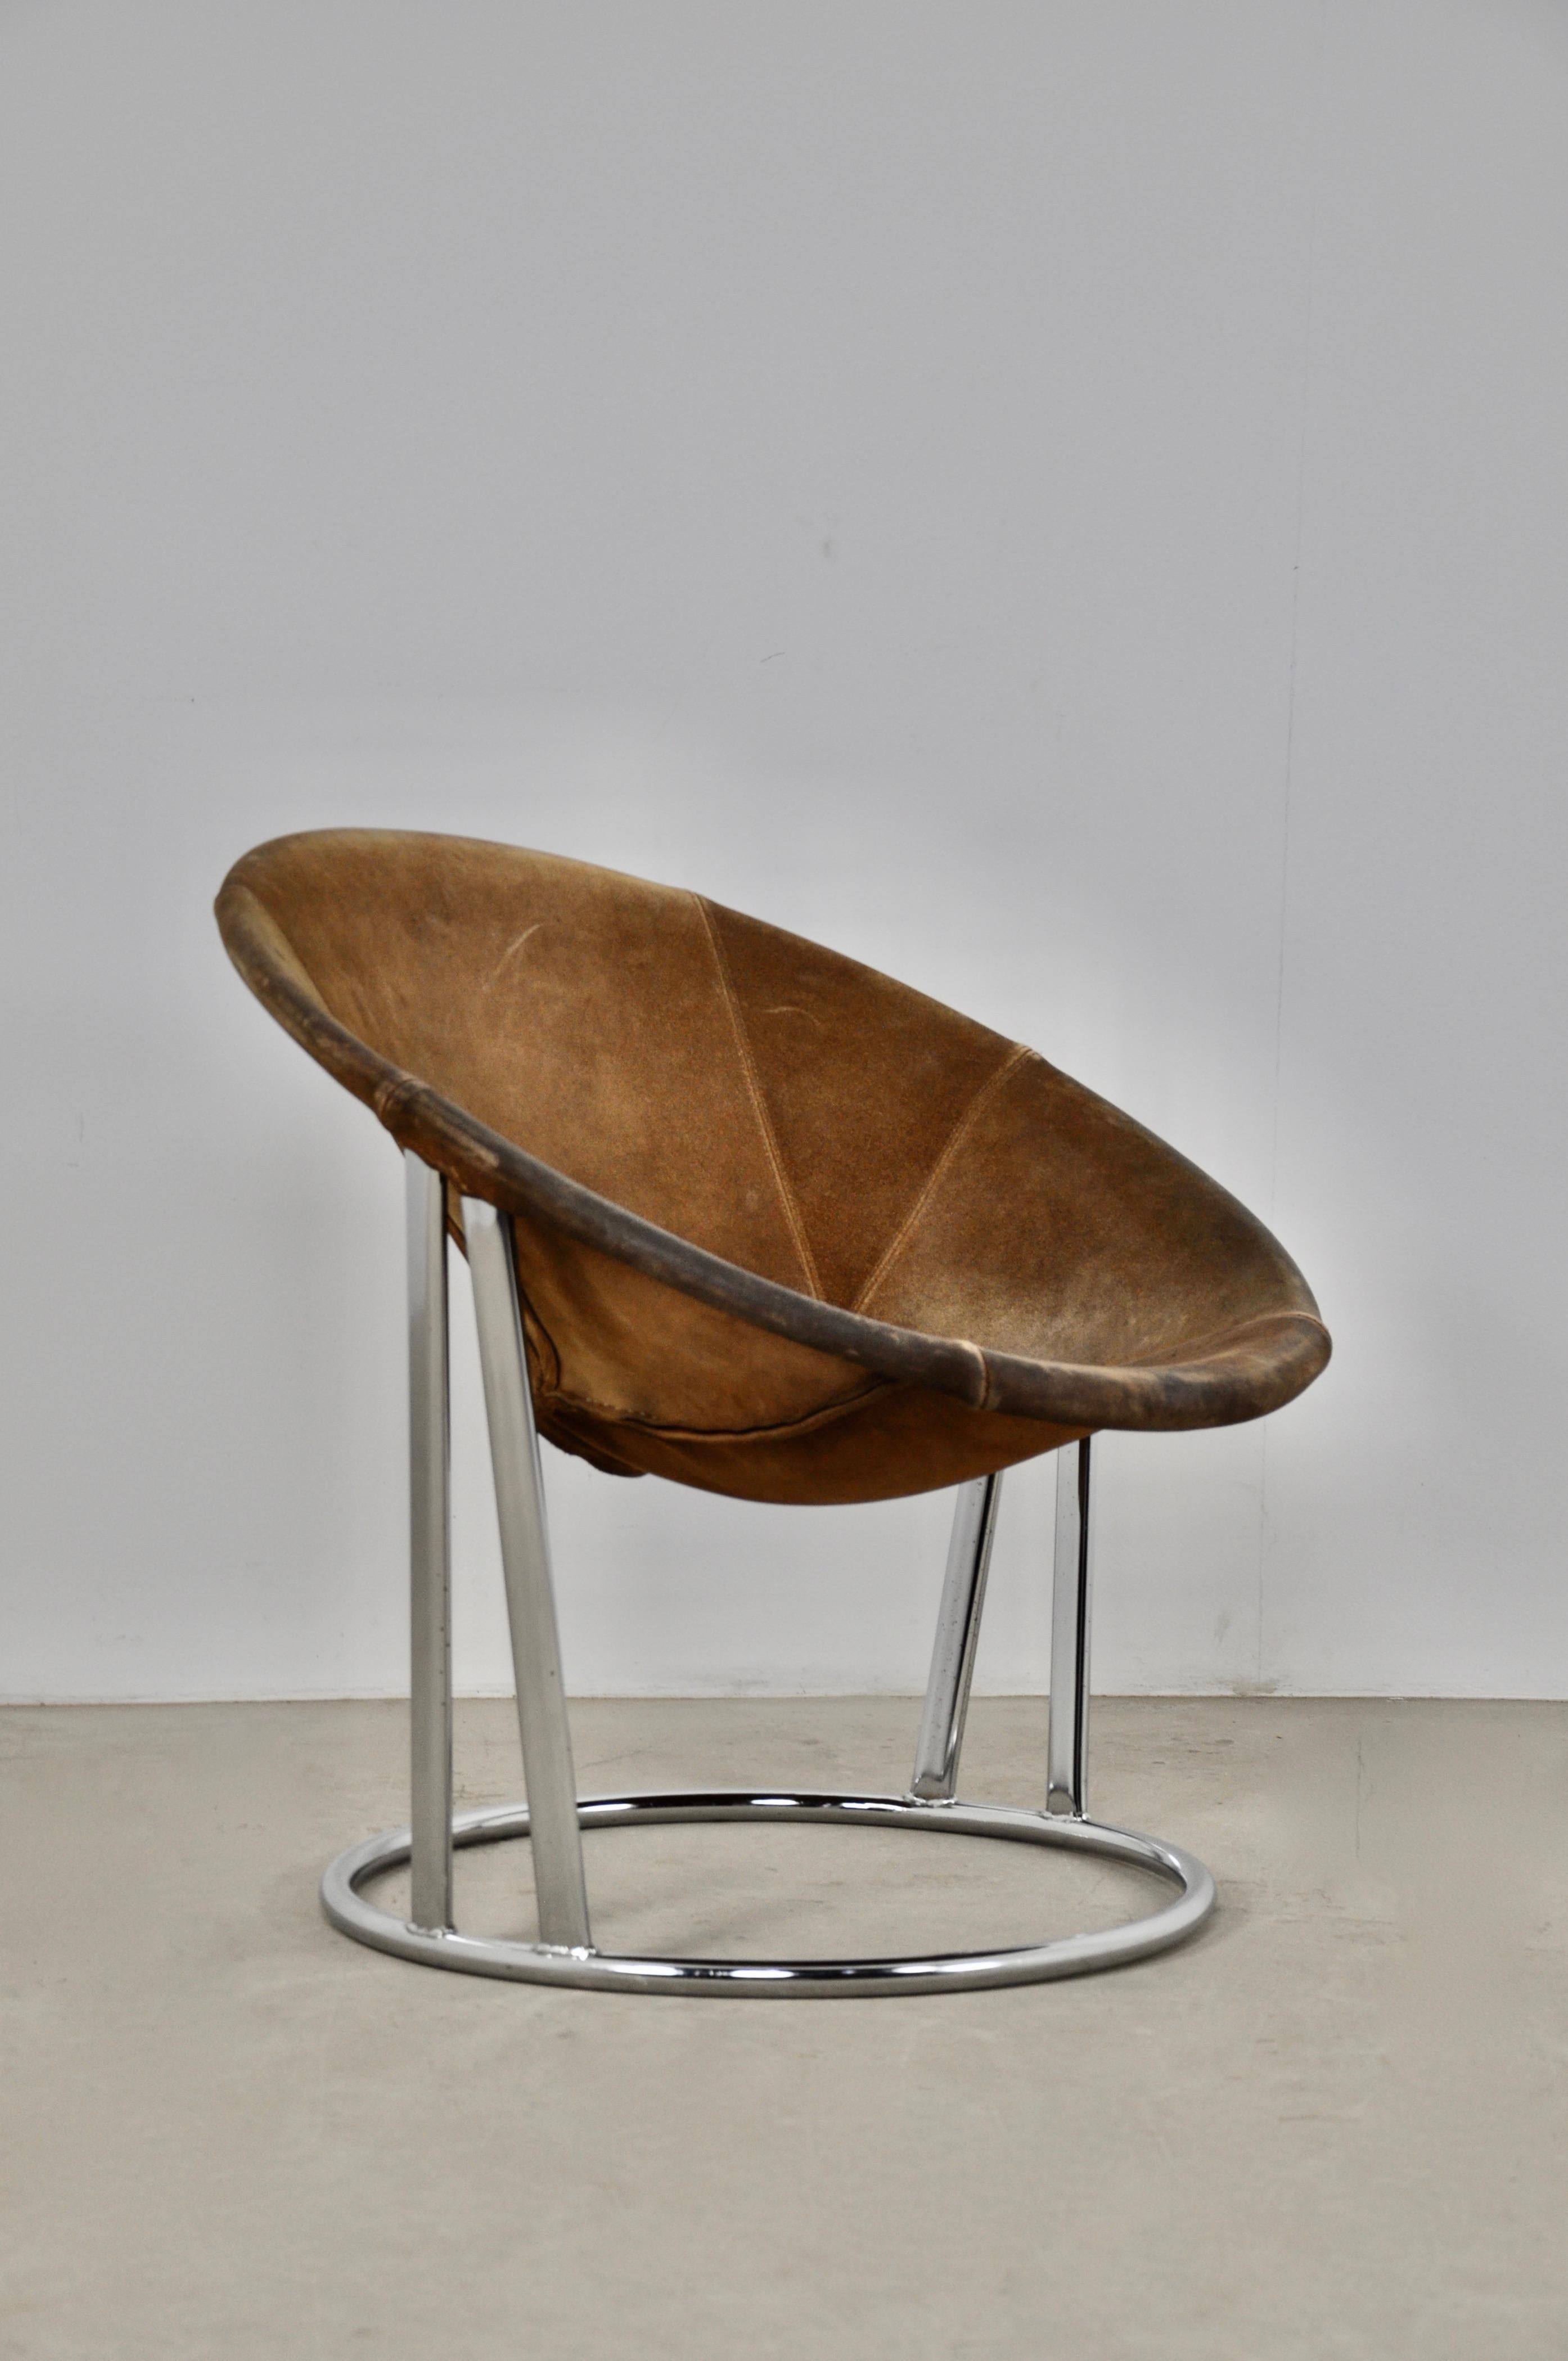 Armchair in suede and chromed metal. Seat height: 37cm. Wear due to time and age of the chair.